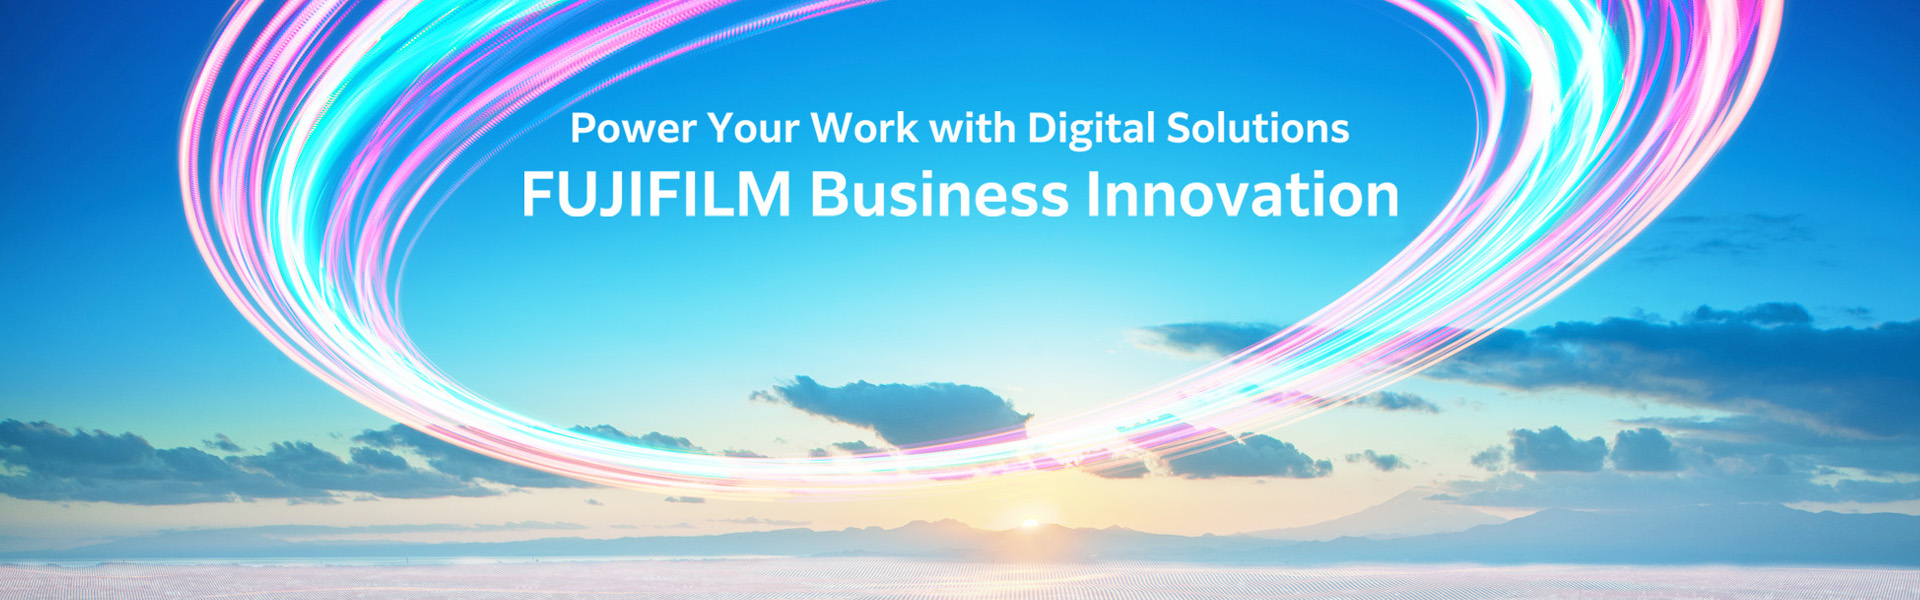 Power Your Work with Digital Solutions